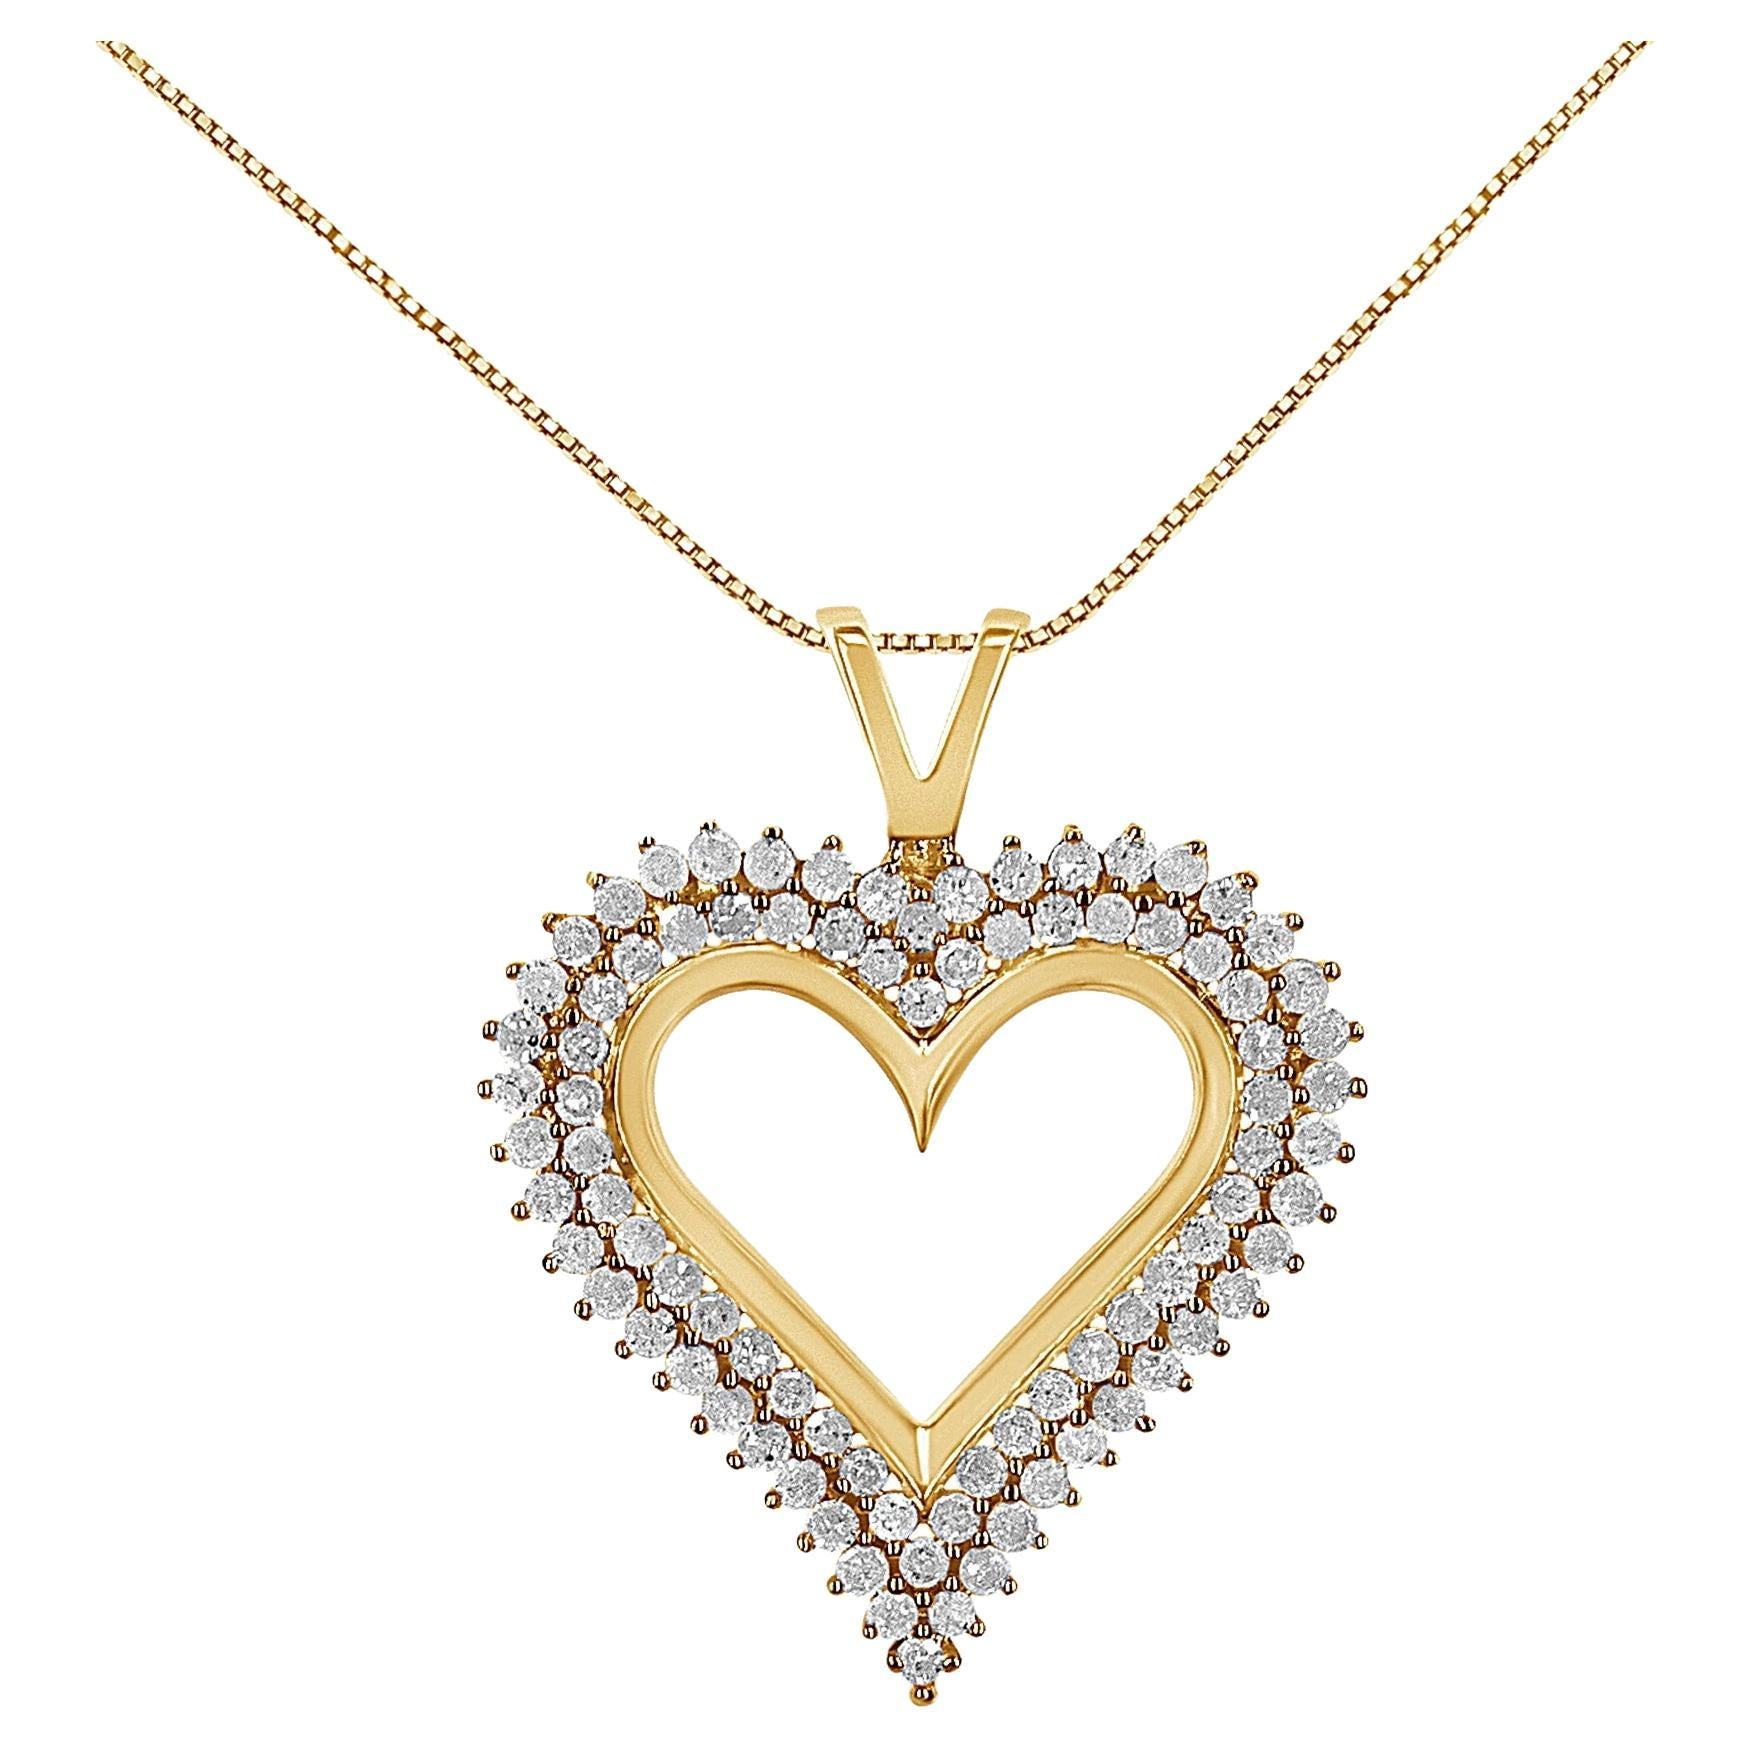 10k Yellow Gold Plated Sterling Silver 1.0 Carat Diamond Heart Pendant Necklace For Sale